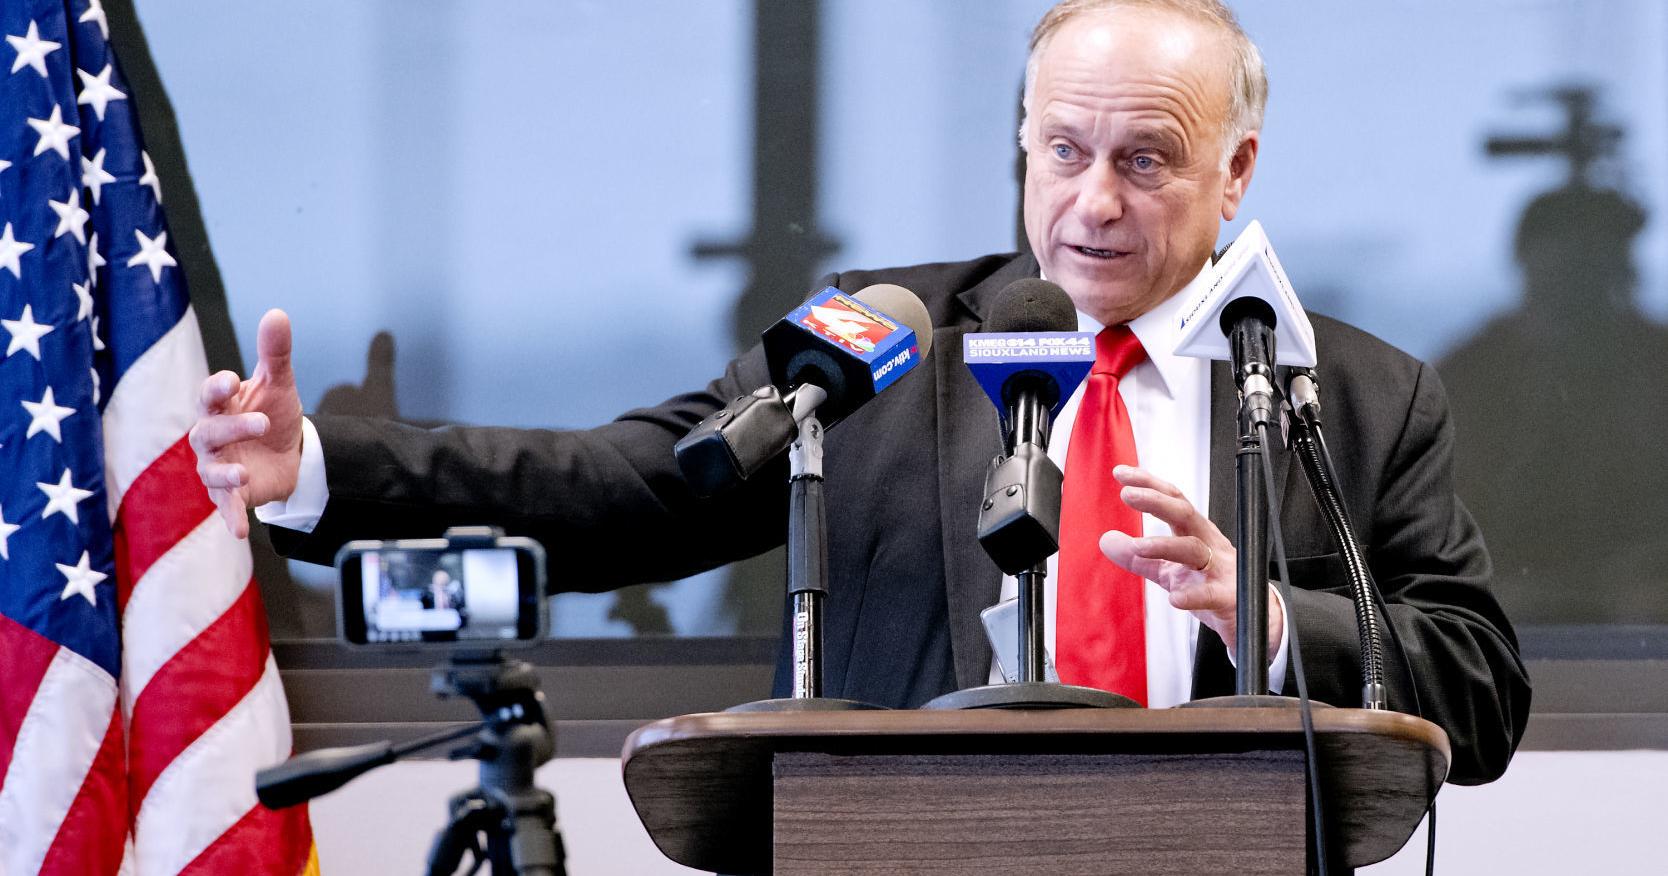 Federal judge denies Steve King's motion to reduce damage award from "Success Kid" trial